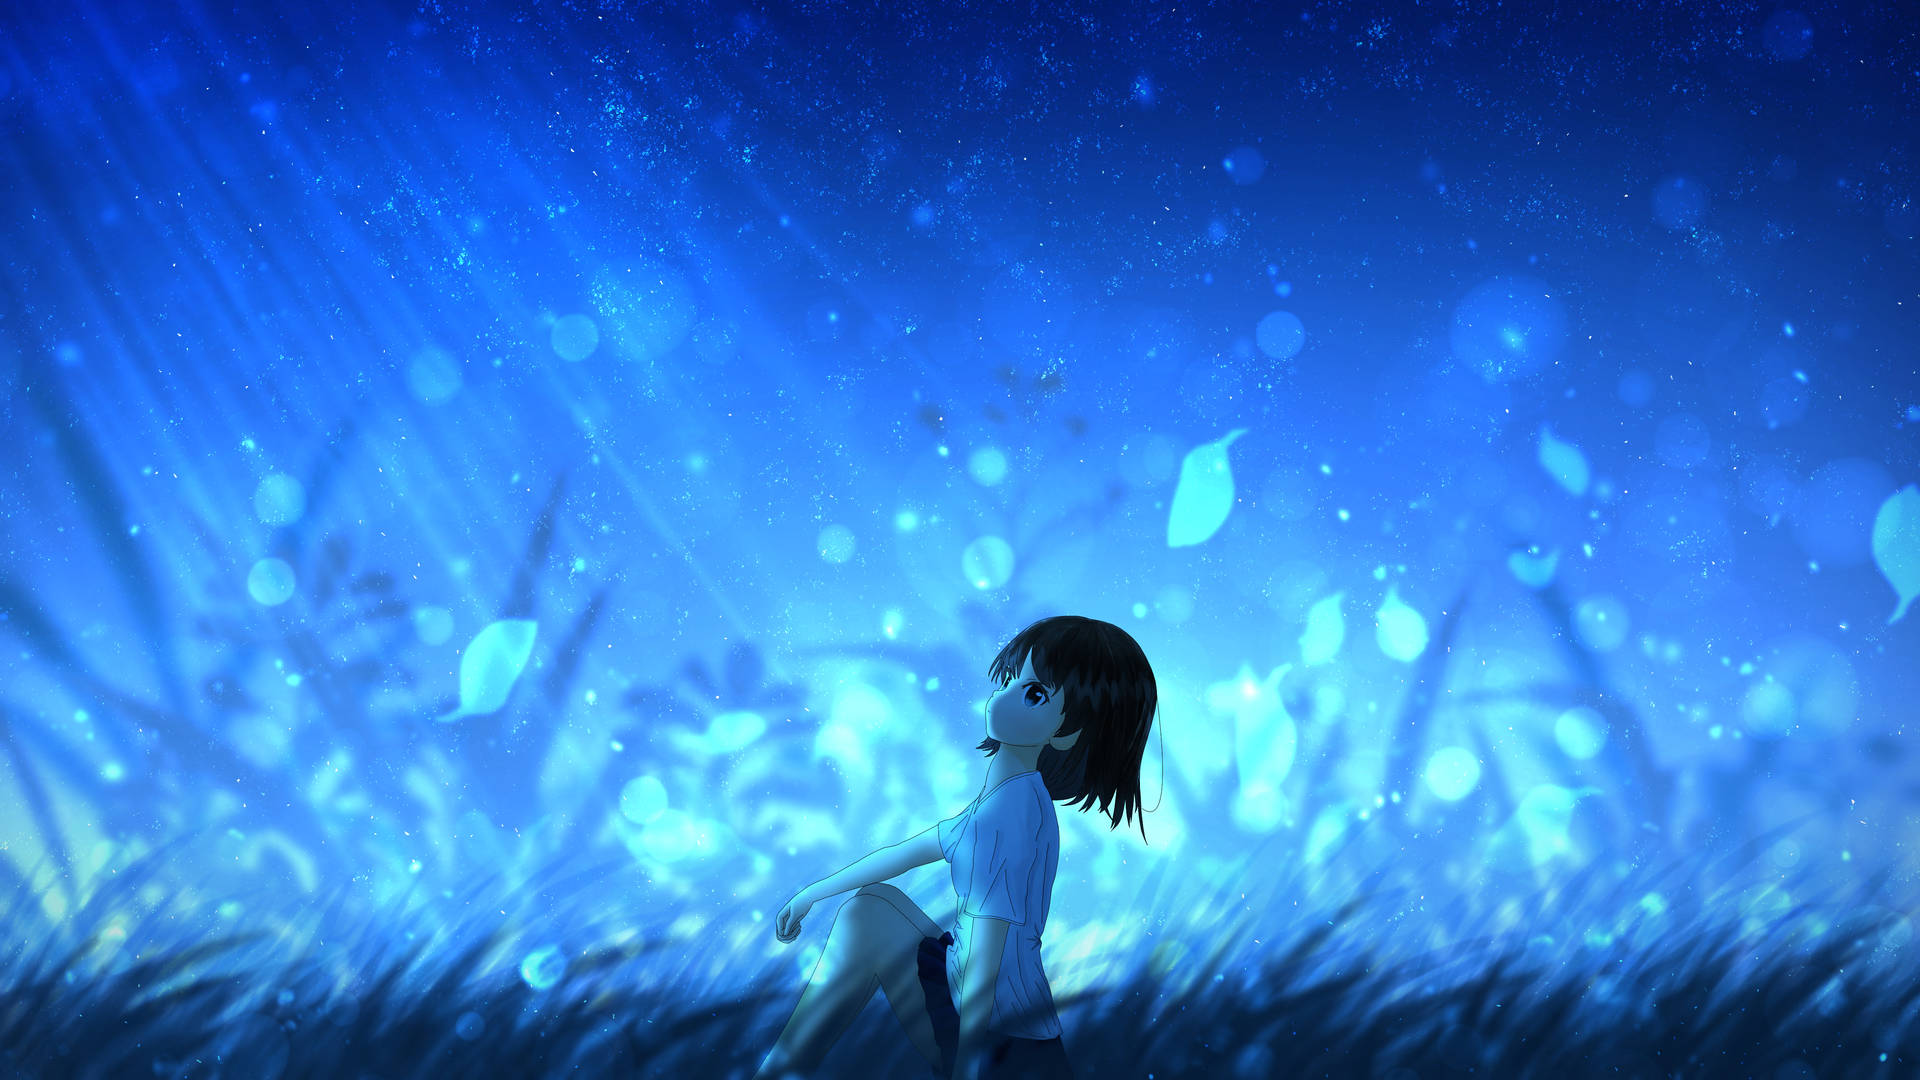 Animated Girl In Field